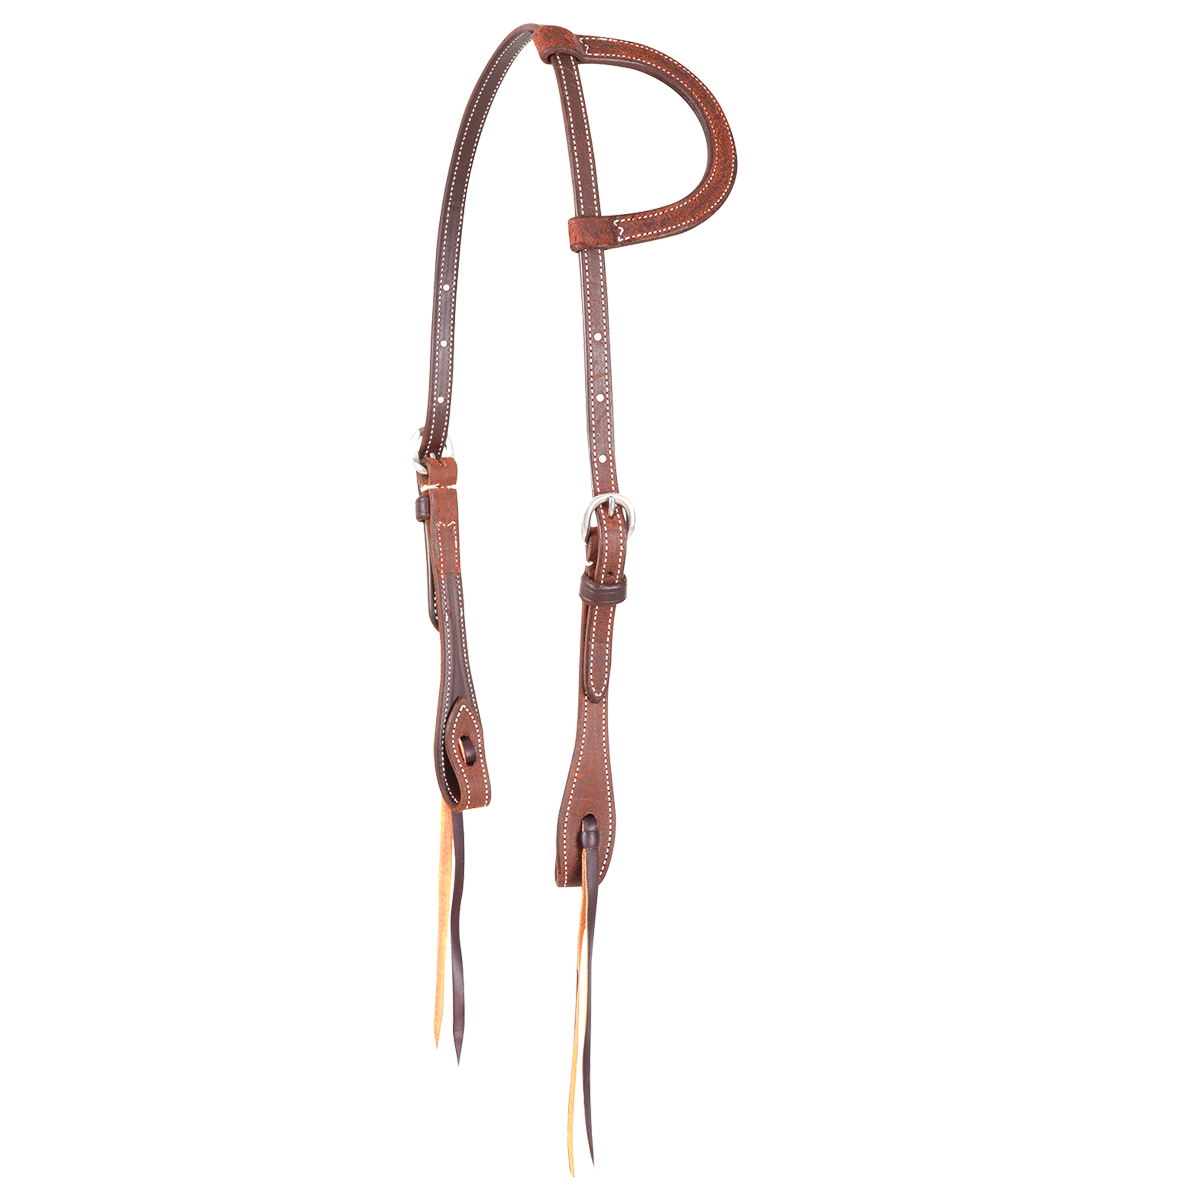 Martin Chestnut Roughout Headstall - West 20 Saddle Co.